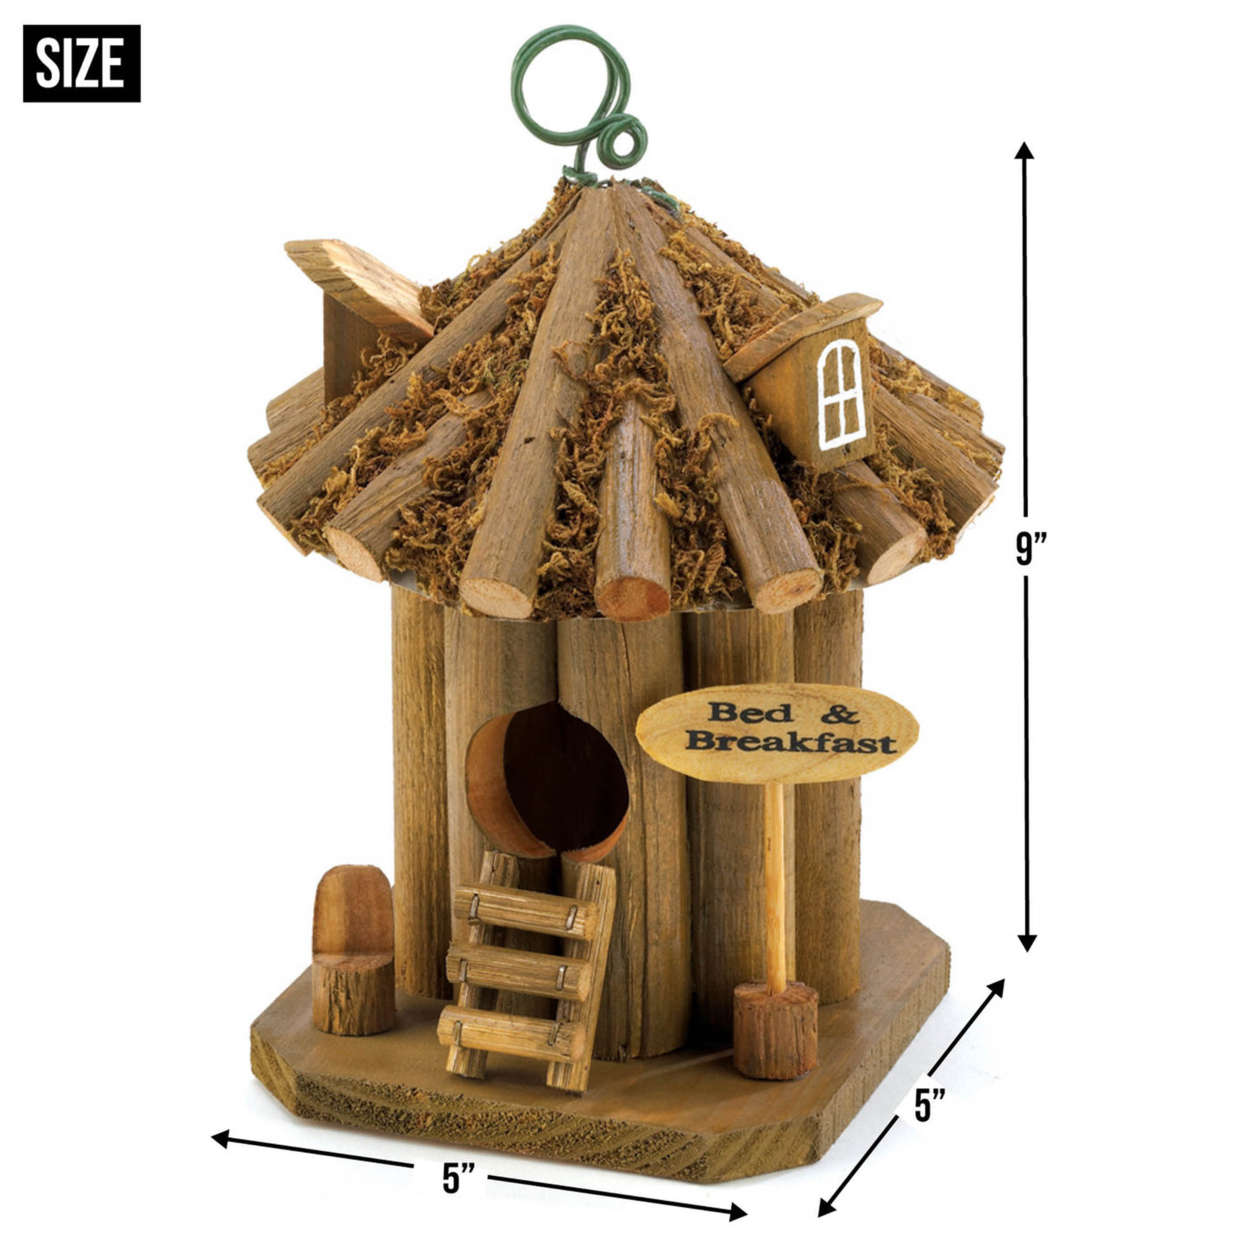 Home Decorative Bed And Breakfast Wood Birdhouse - Brown - image 5 of 5